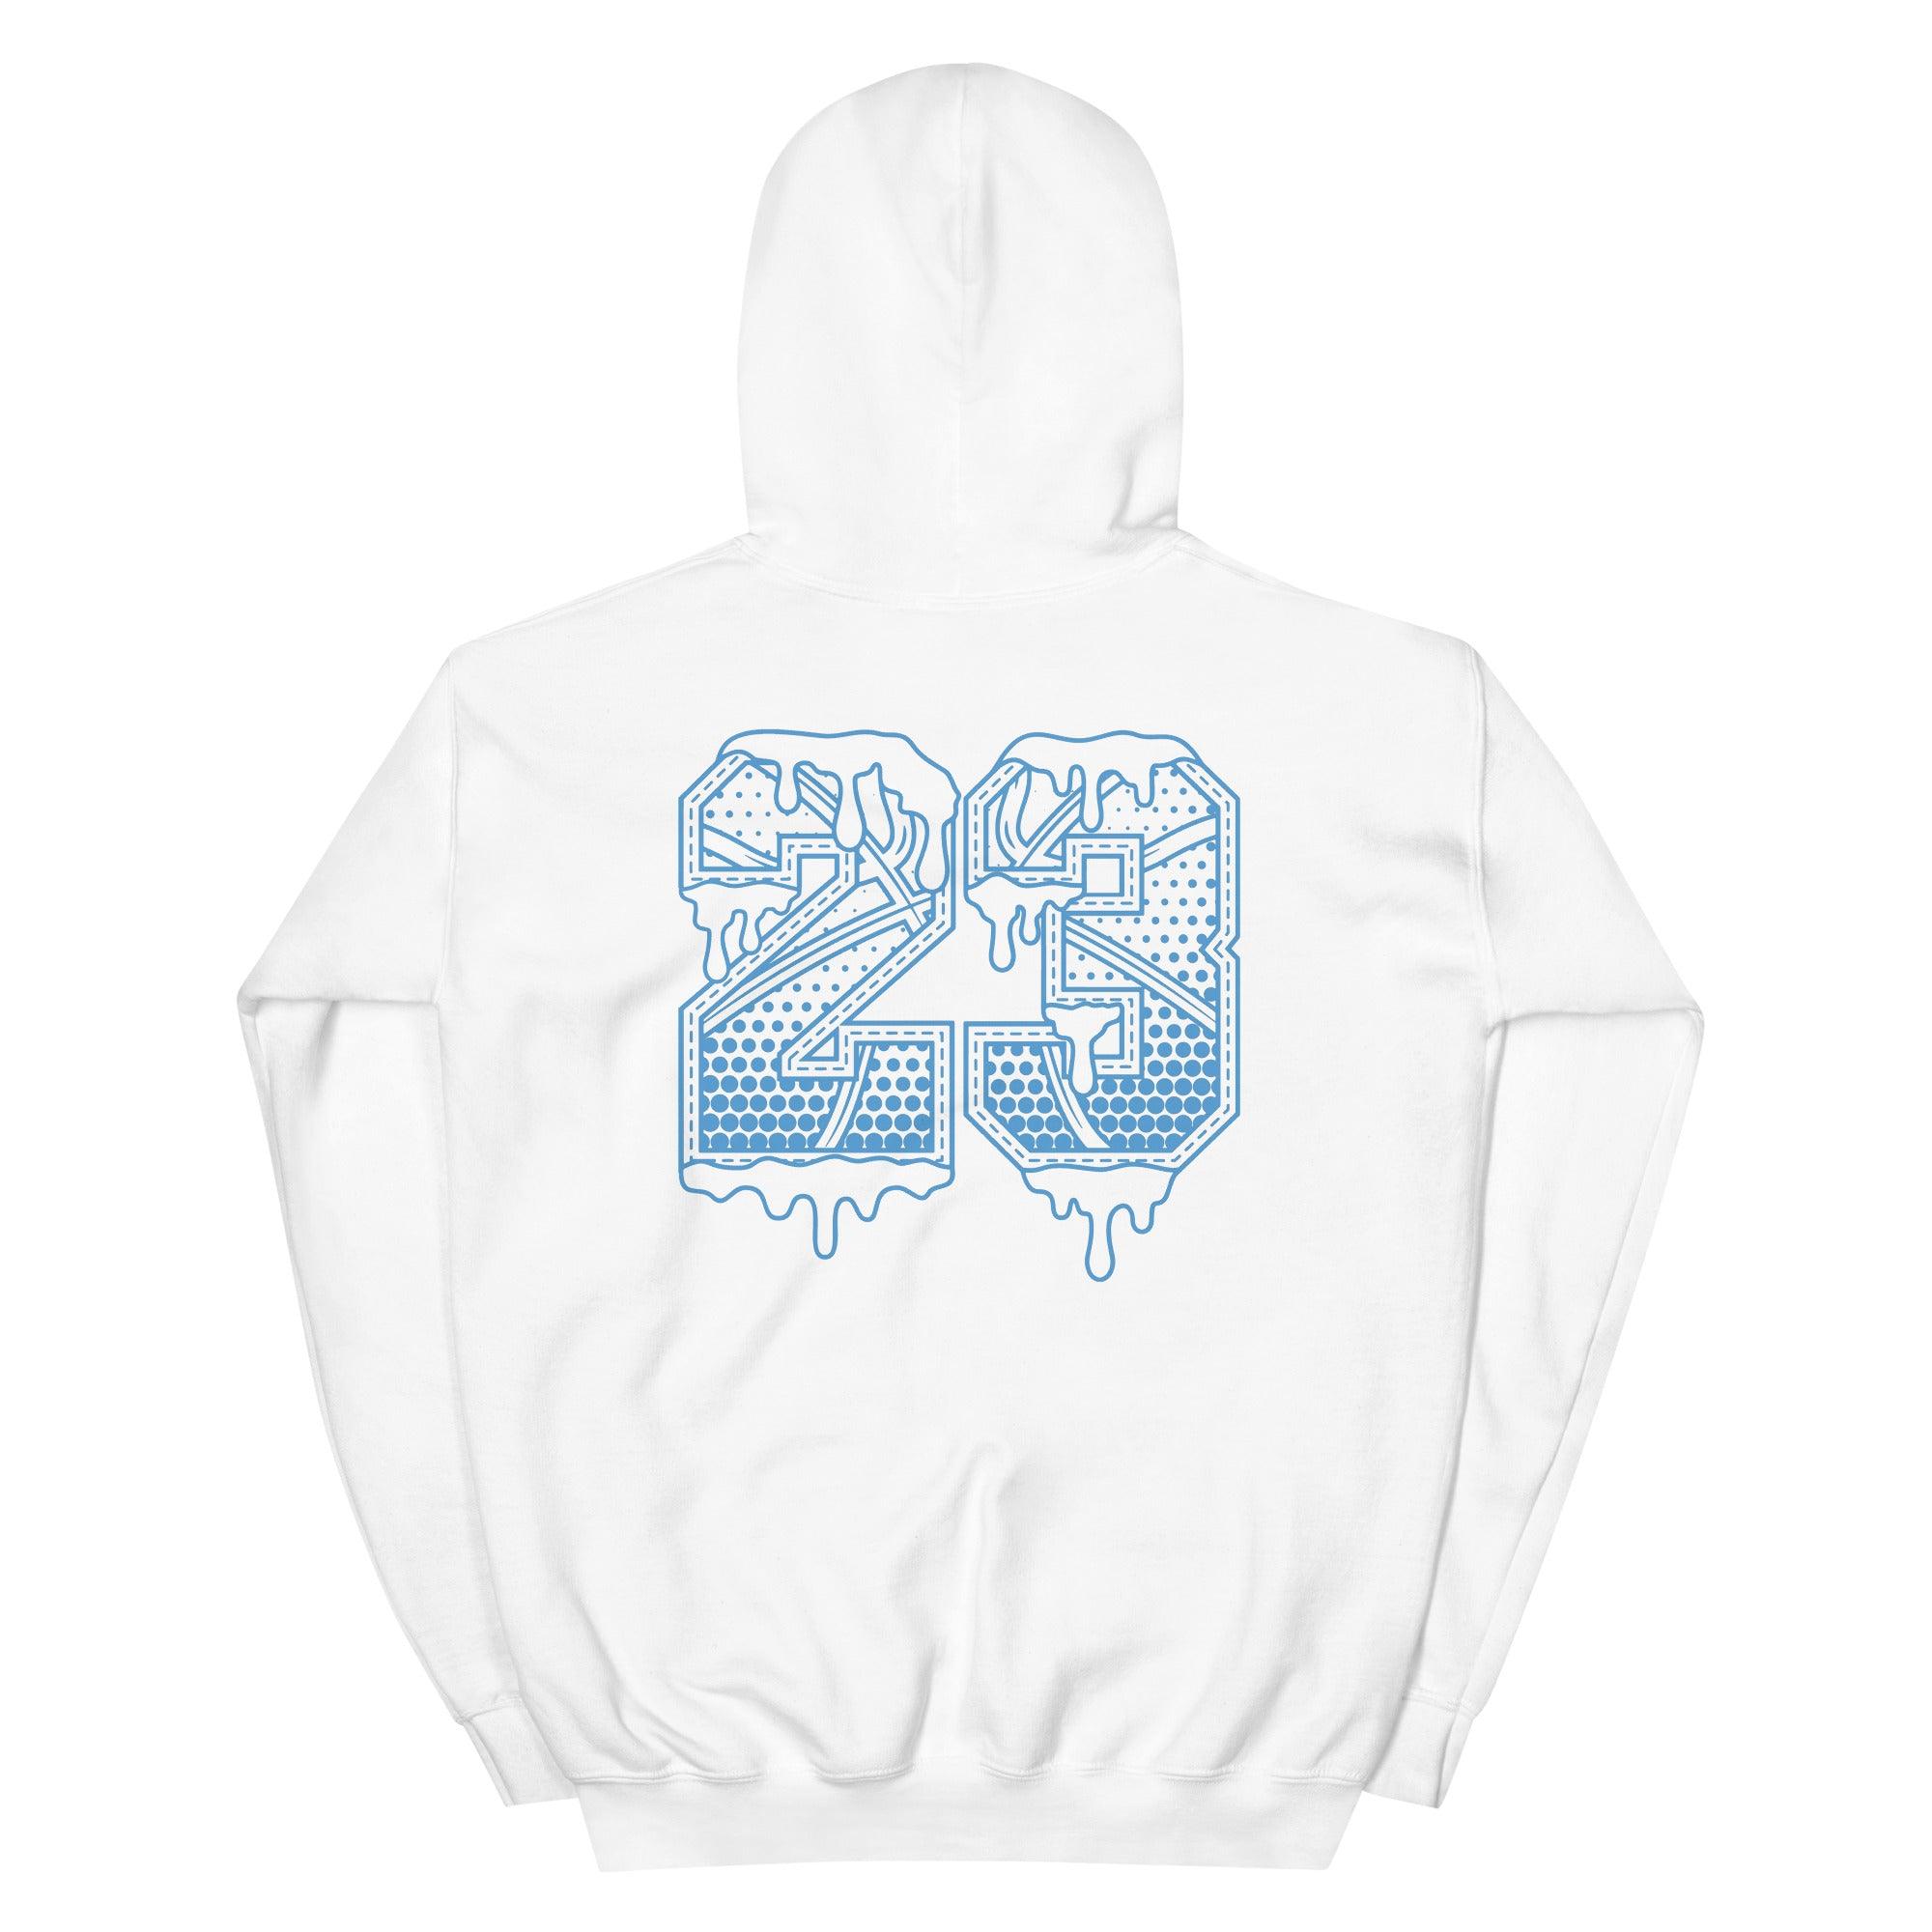 Number 23 Ball Hoodie Nike Air Force 1 High White University Blue photo